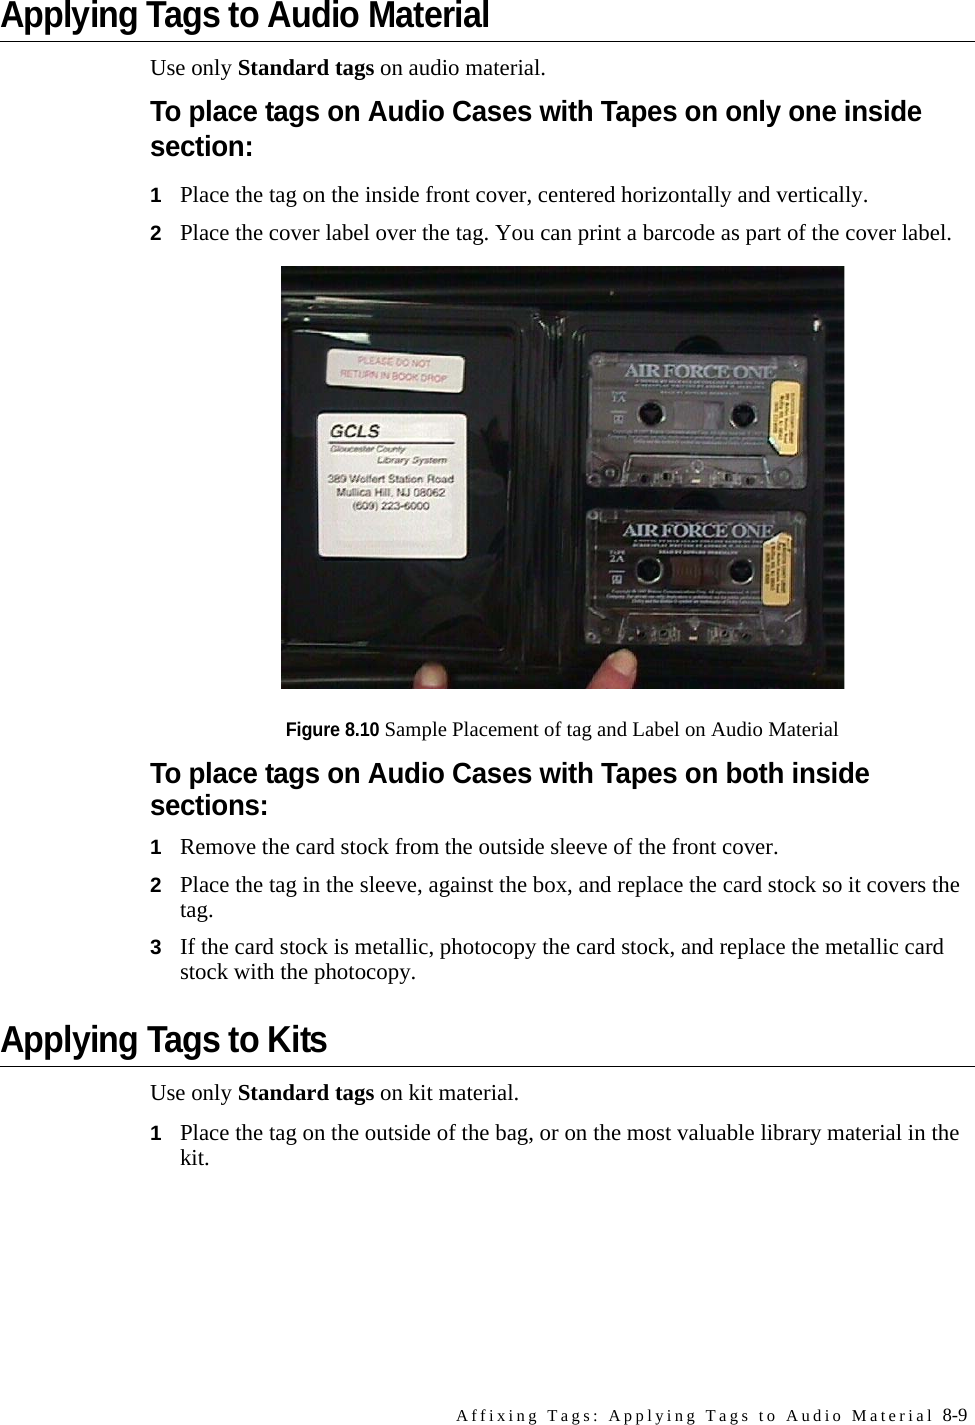 Affixing Tags: Applying Tags to Audio Material 8-9Applying Tags to Audio MaterialUse only Standard tags on audio material.To place tags on Audio Cases with Tapes on only one inside section:1Place the tag on the inside front cover, centered horizontally and vertically.2Place the cover label over the tag. You can print a barcode as part of the cover label.Figure 8.10 Sample Placement of tag and Label on Audio MaterialTo place tags on Audio Cases with Tapes on both inside sections:1Remove the card stock from the outside sleeve of the front cover.2Place the tag in the sleeve, against the box, and replace the card stock so it covers the tag.3If the card stock is metallic, photocopy the card stock, and replace the metallic card stock with the photocopy.Applying Tags to KitsUse only Standard tags on kit material. 1Place the tag on the outside of the bag, or on the most valuable library material in the kit. 